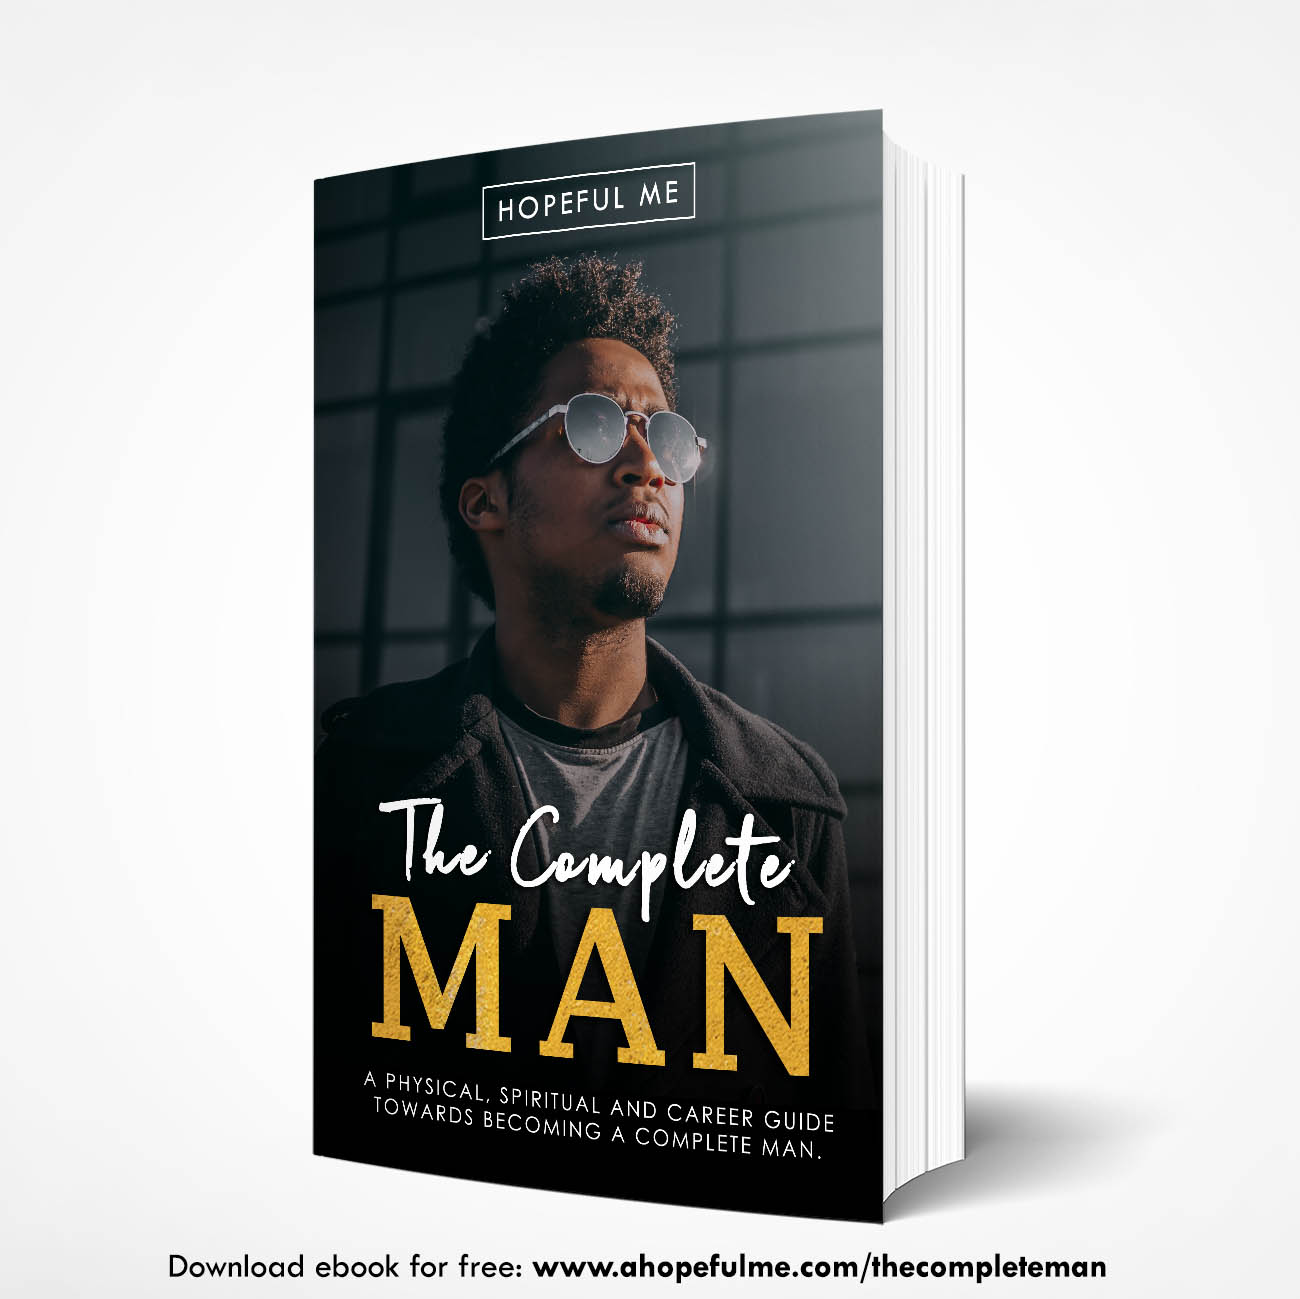 The Complete Man